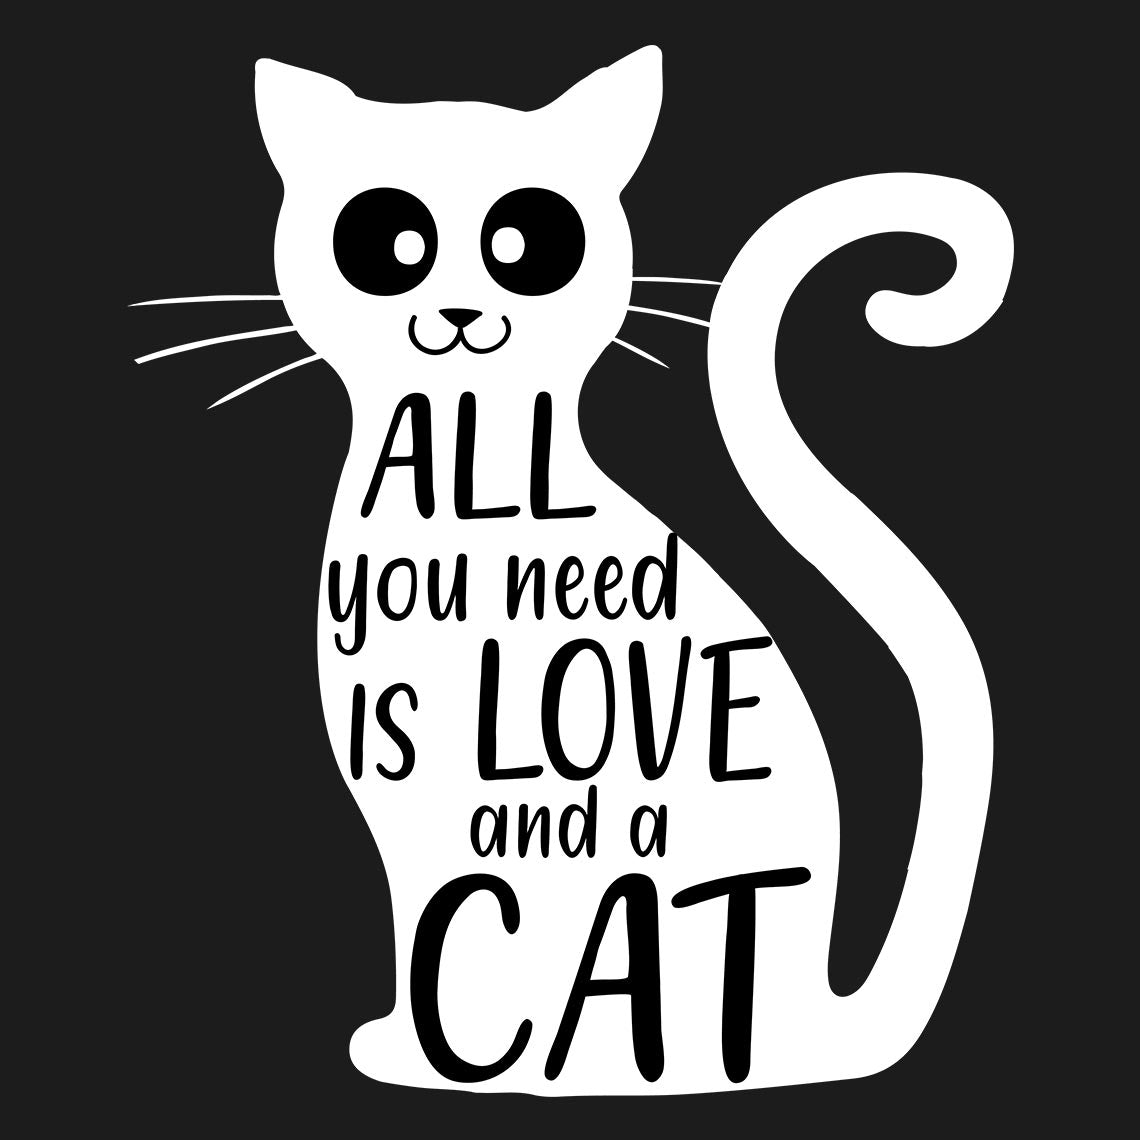 All You Need Is Love and a Cat - Soul & Peace